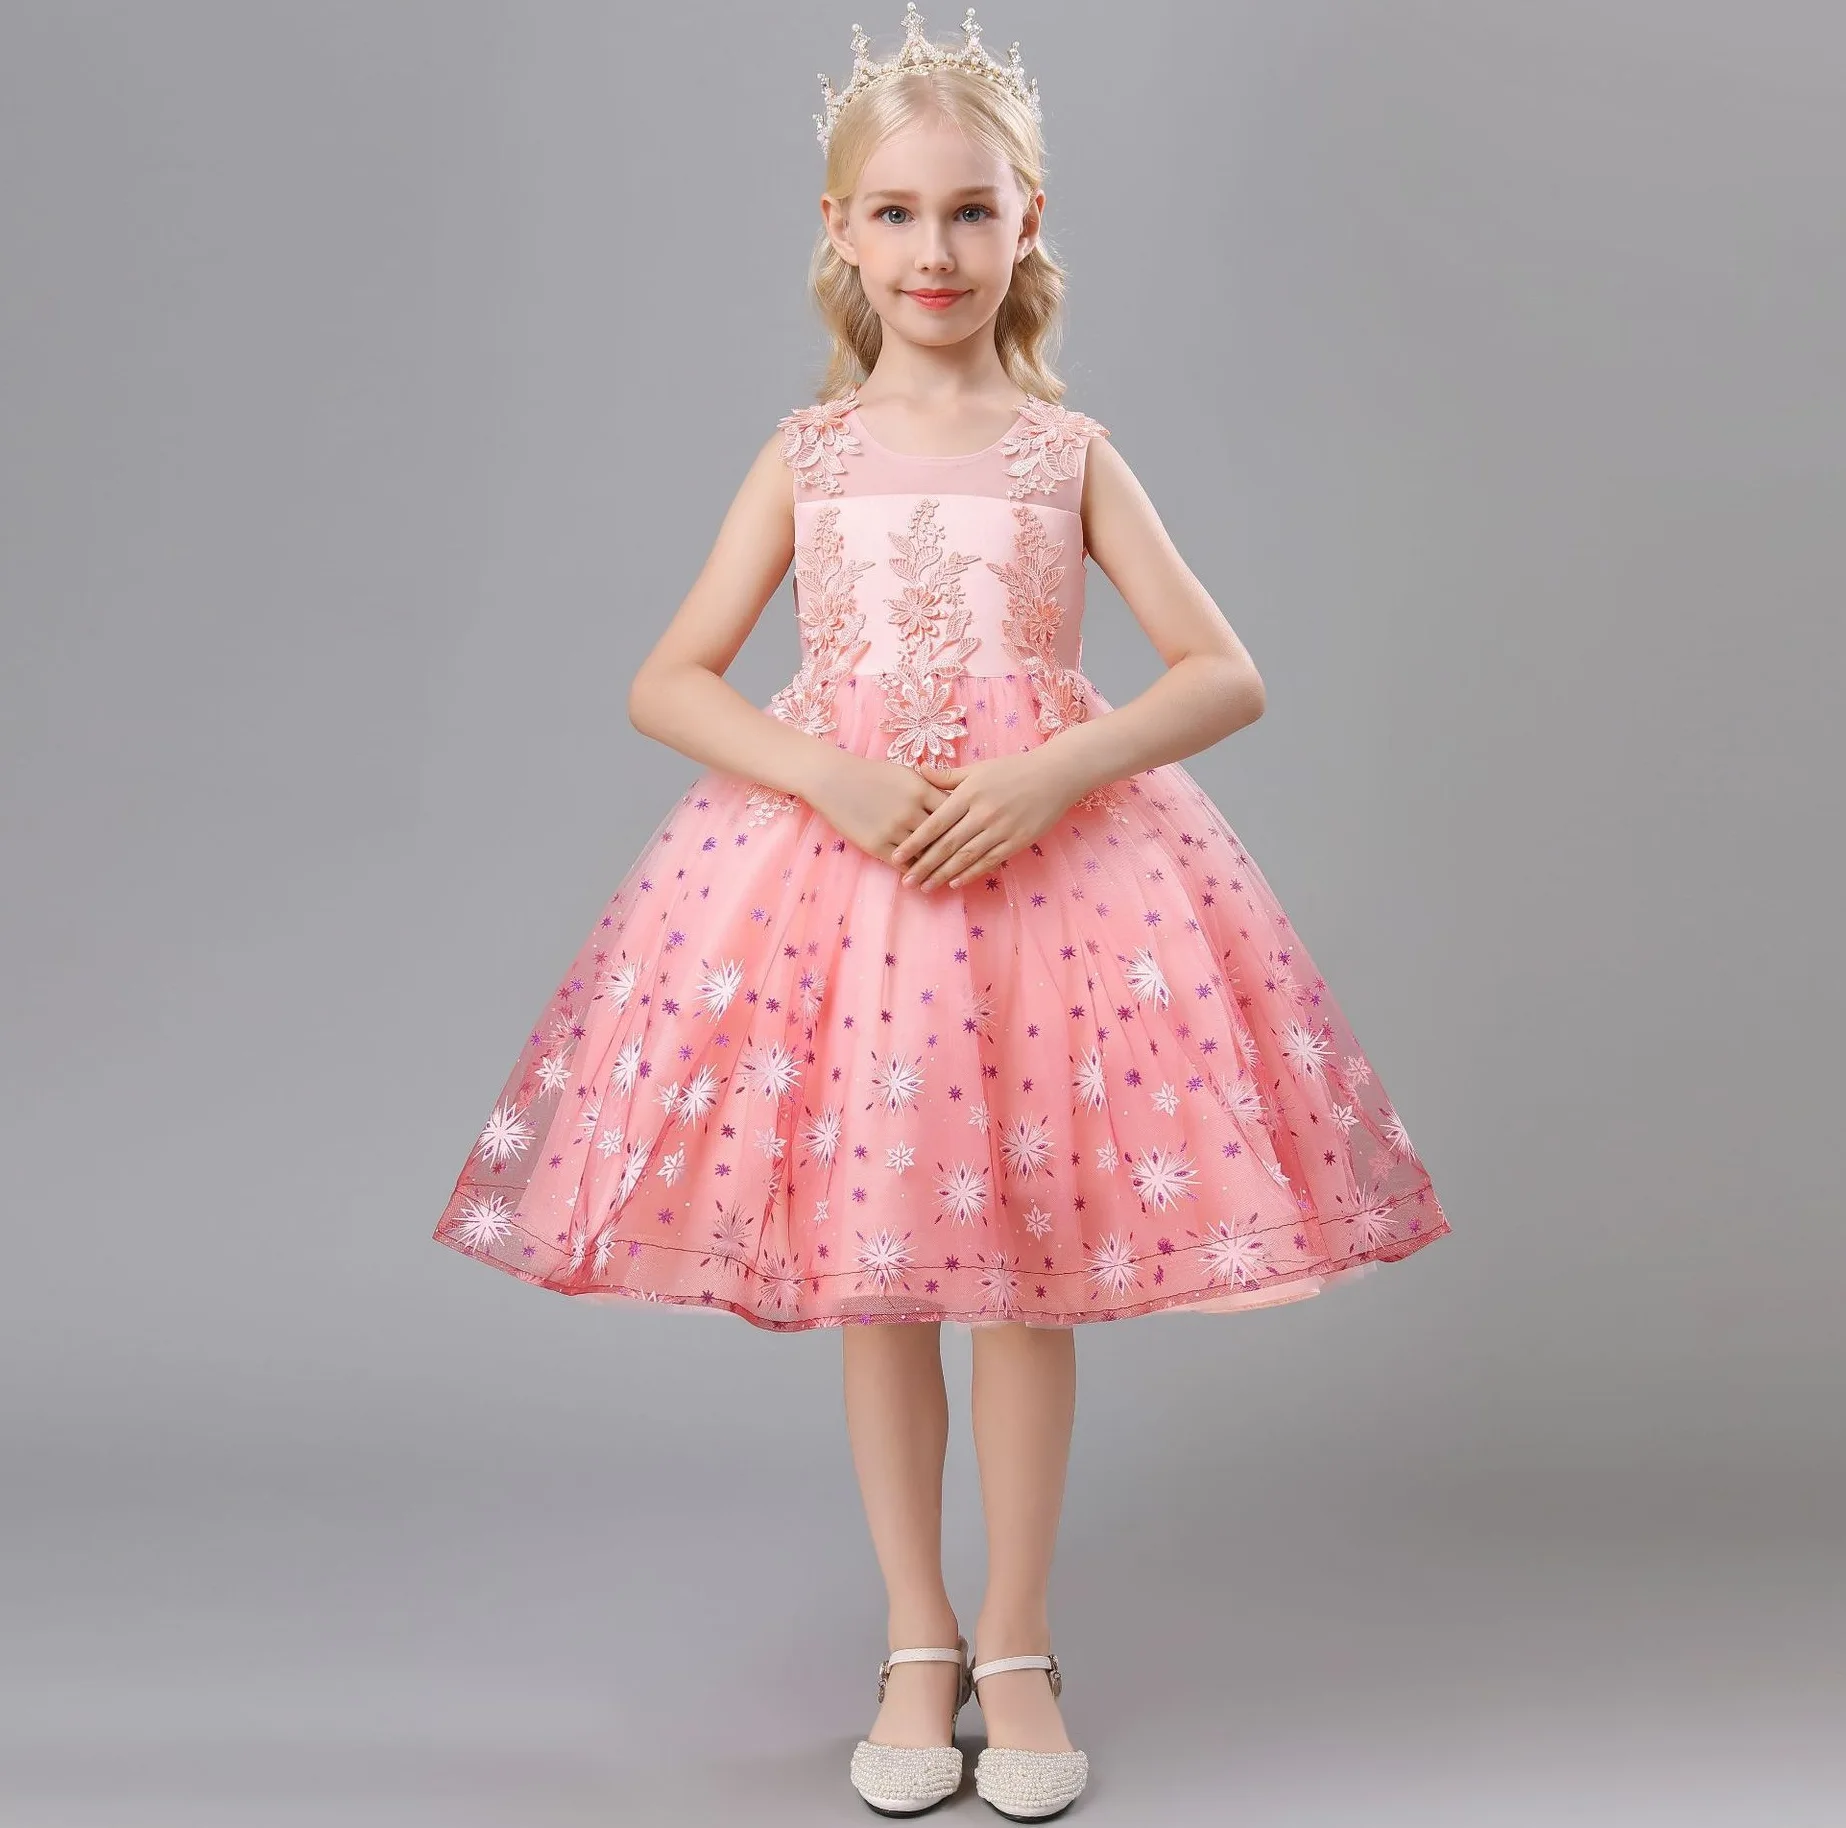 Girls'Party Dresses